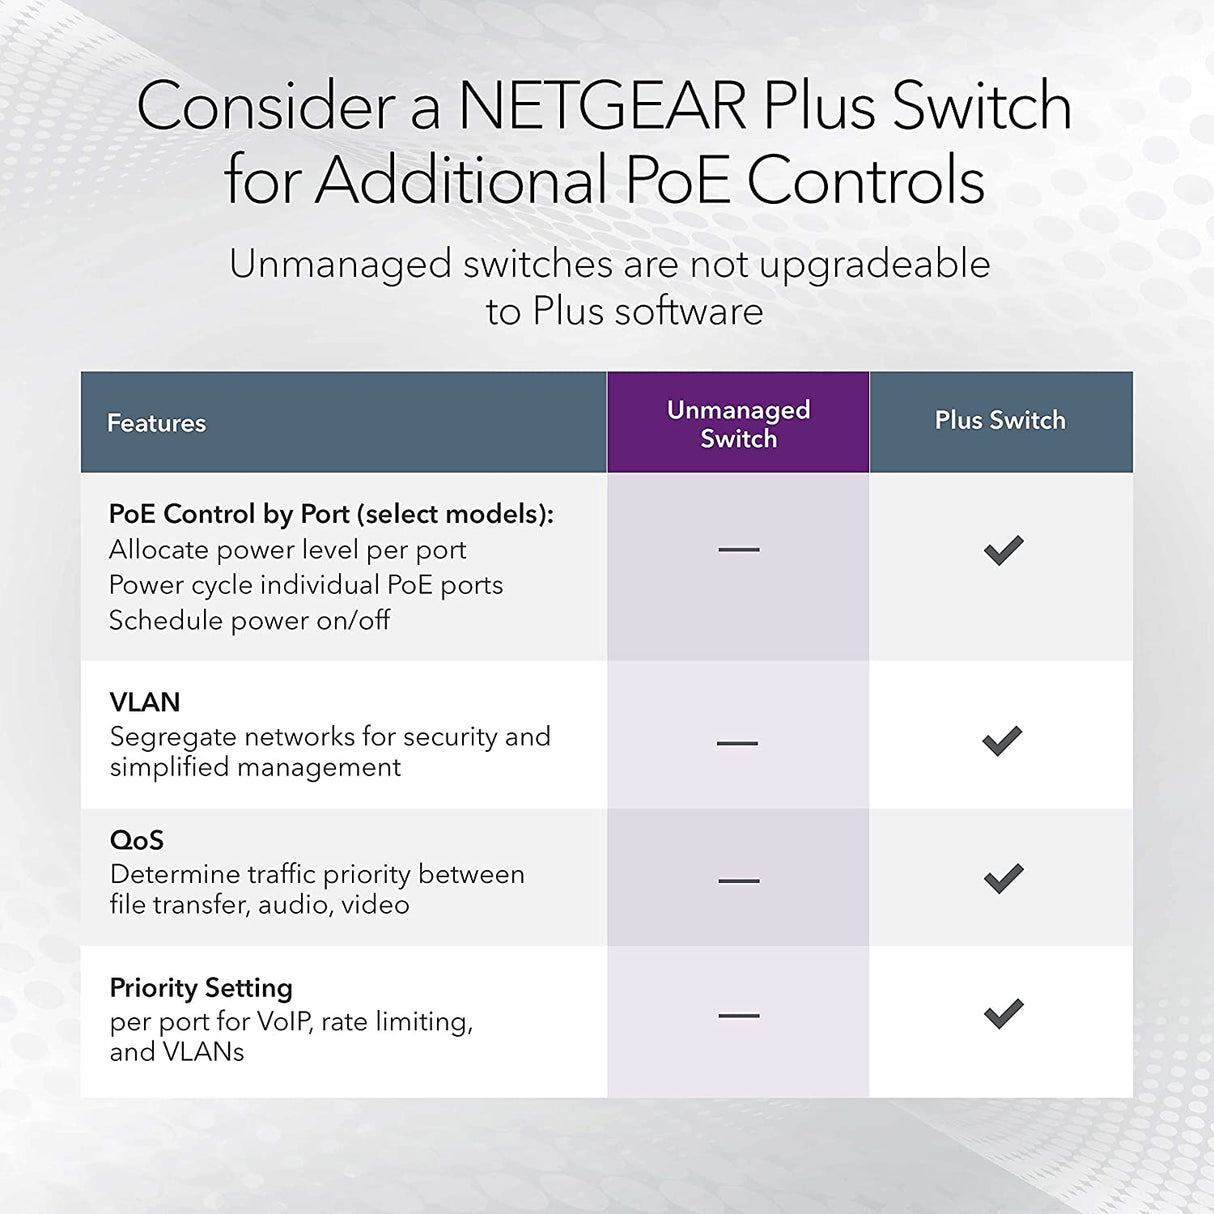 NETGEAR 8-Port Gigabit Ethernet Unmanaged PoE Switch (GS108LP) - with 8 x PoE+ @ 60W Upgradeable, Desktop, Wall Mount or Rackmount, and Limited Lifetime Protection Unmanaged 8 port | 8xPoE+ 60W